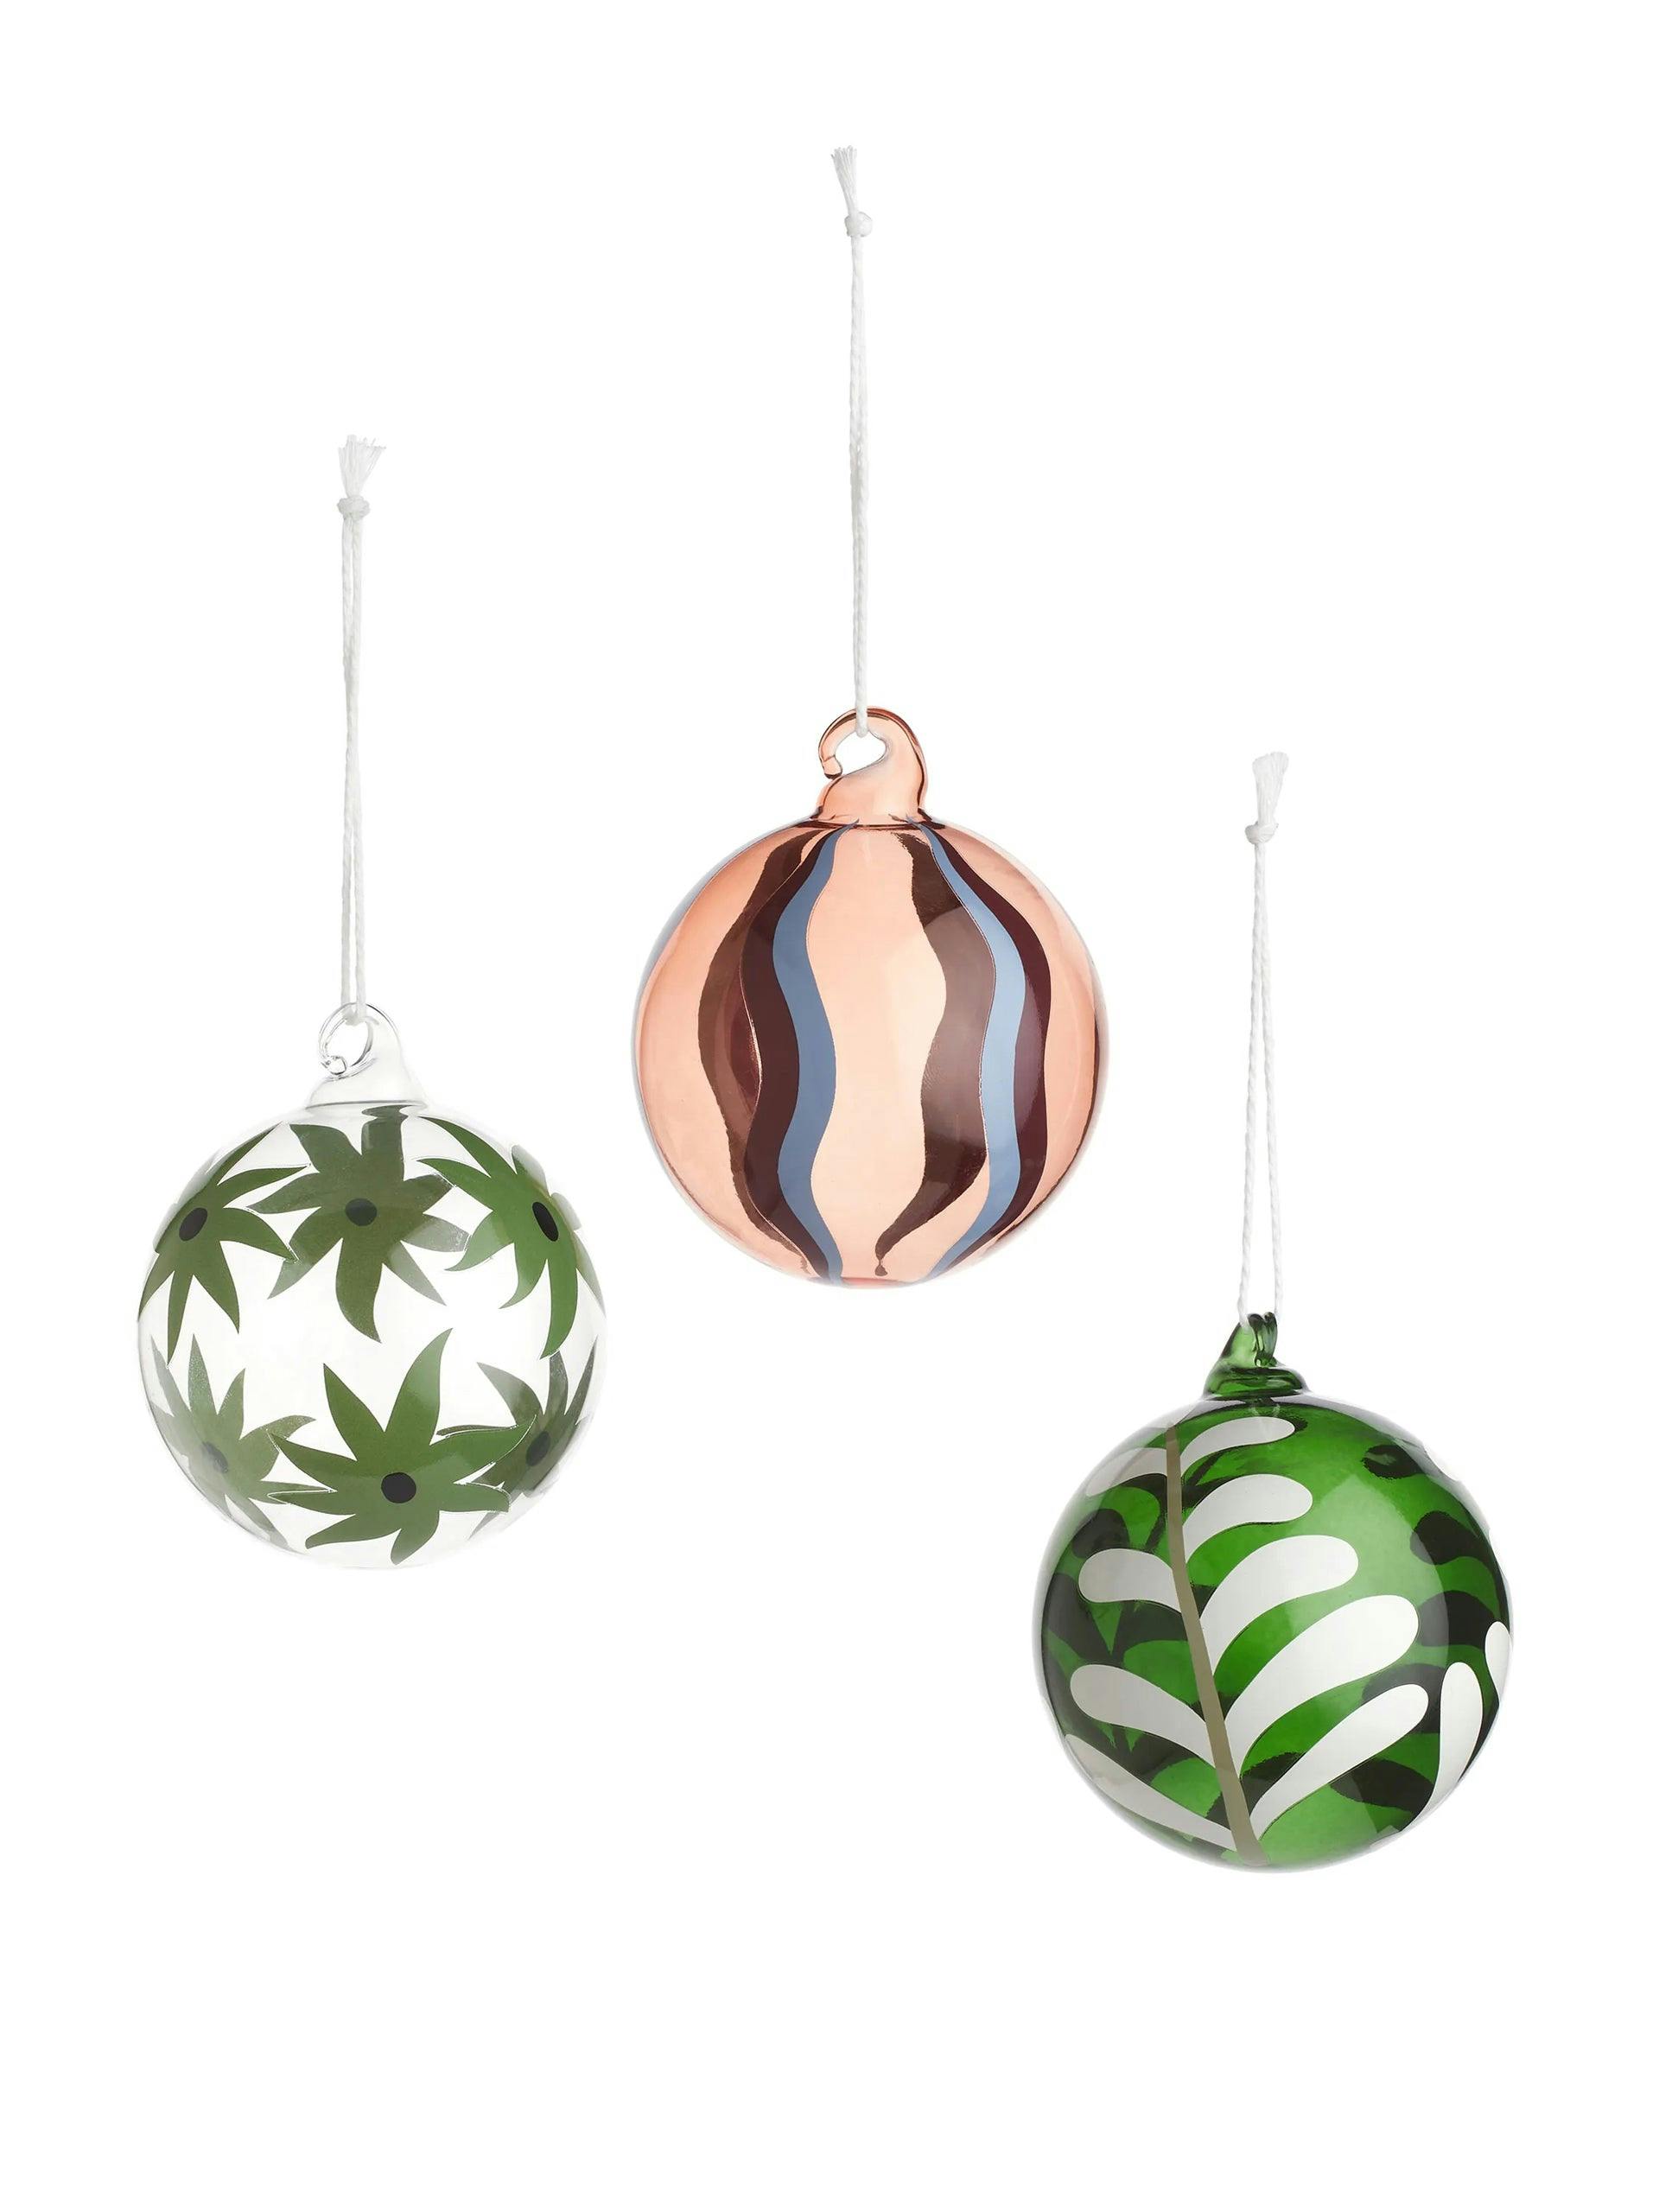 Patterned glass baubles (set of 3)